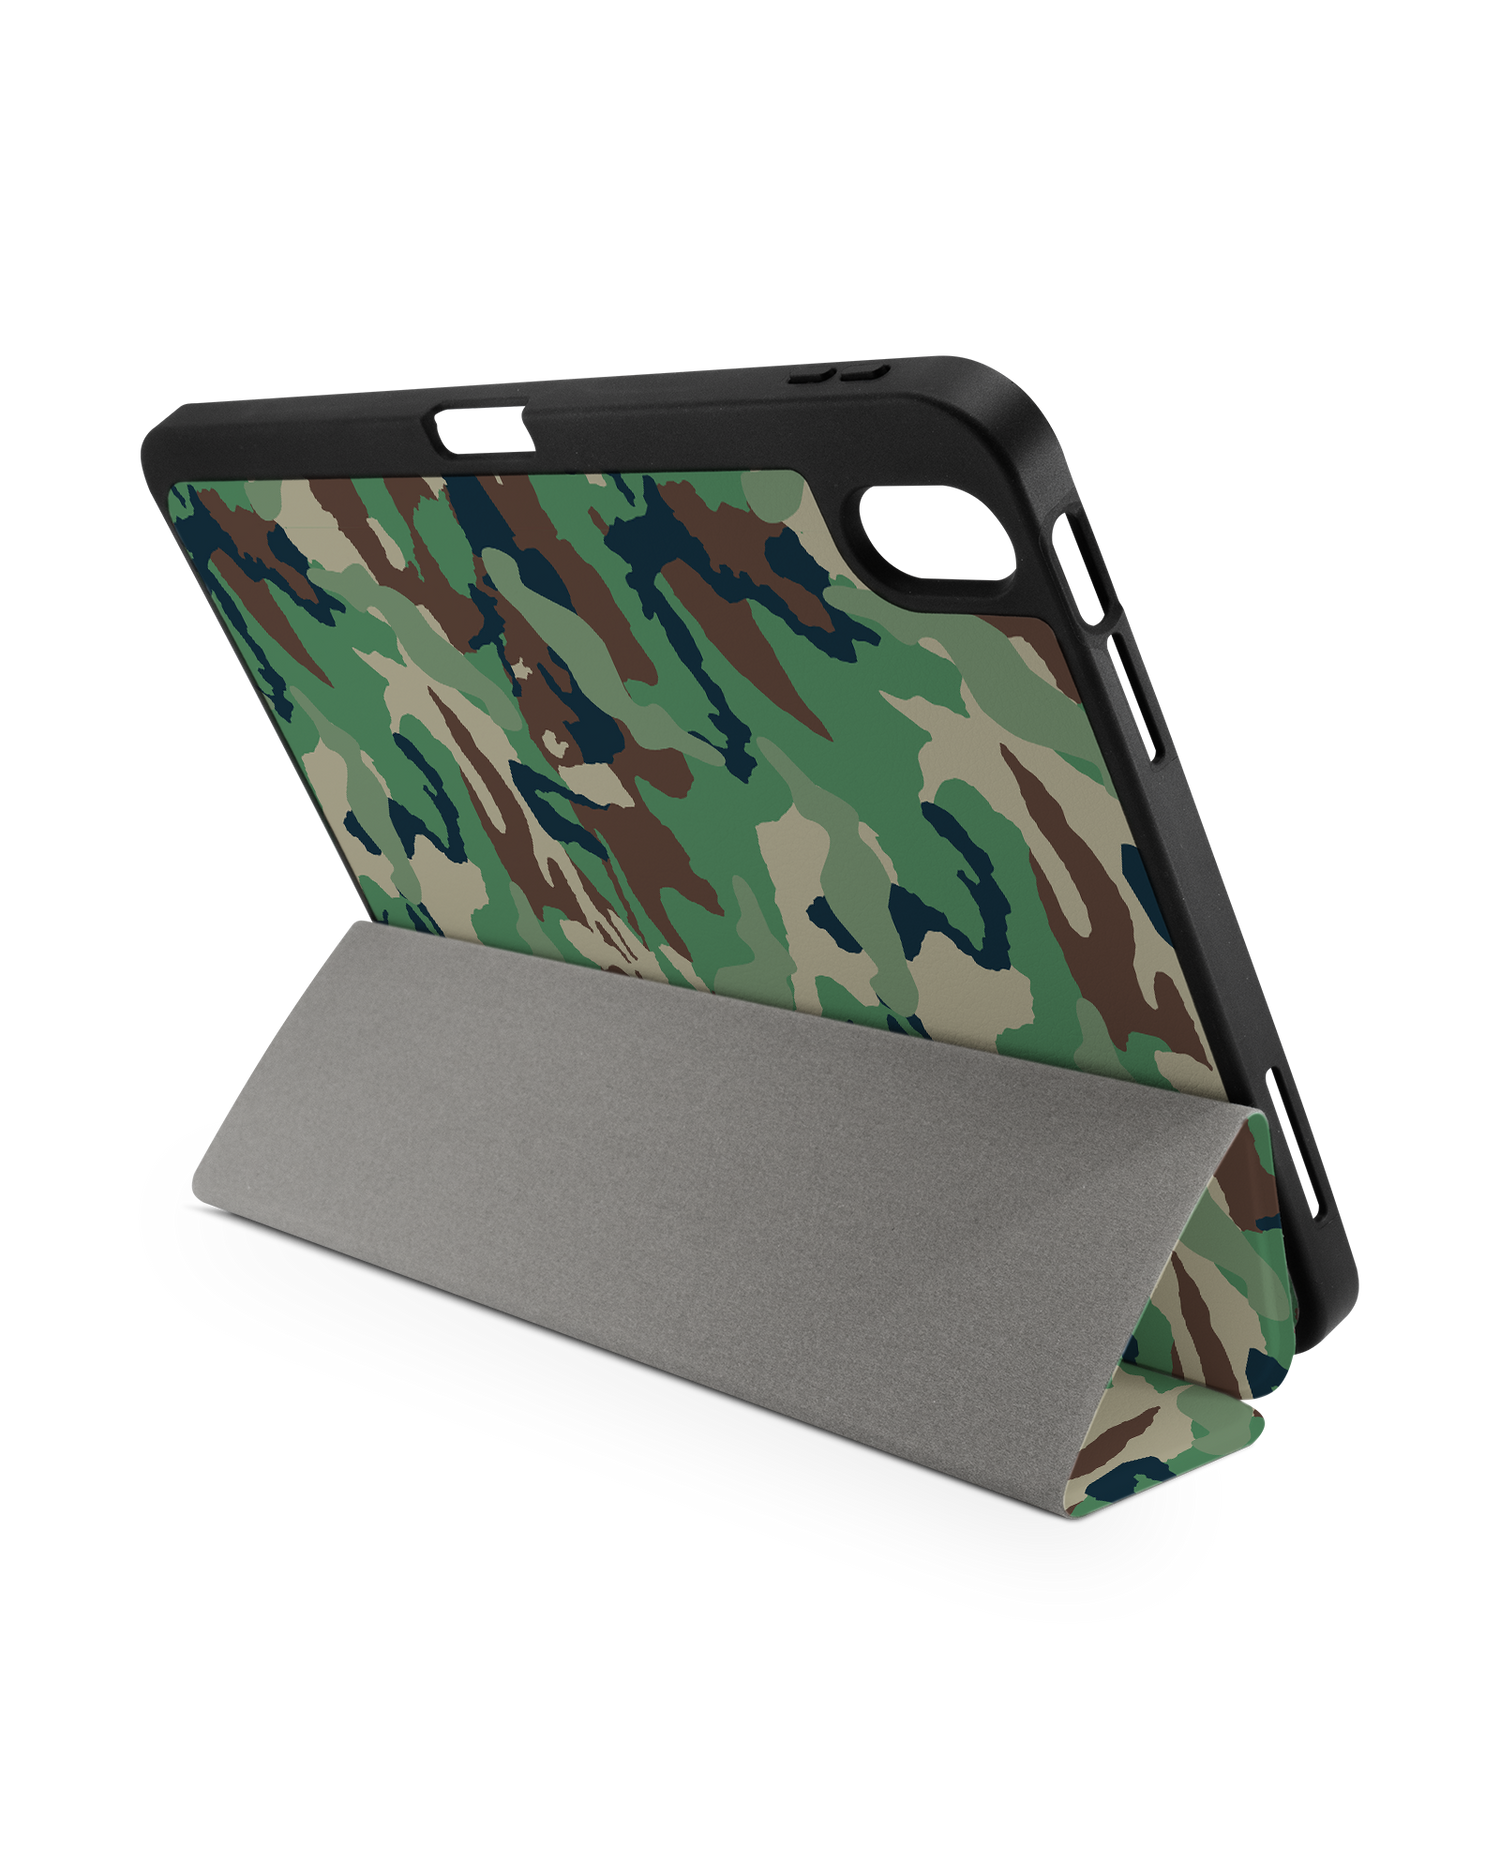 Green and Brown Camo iPad Case with Pencil Holder for Apple iPad (10th Generation): Set up in landscape format (back view)